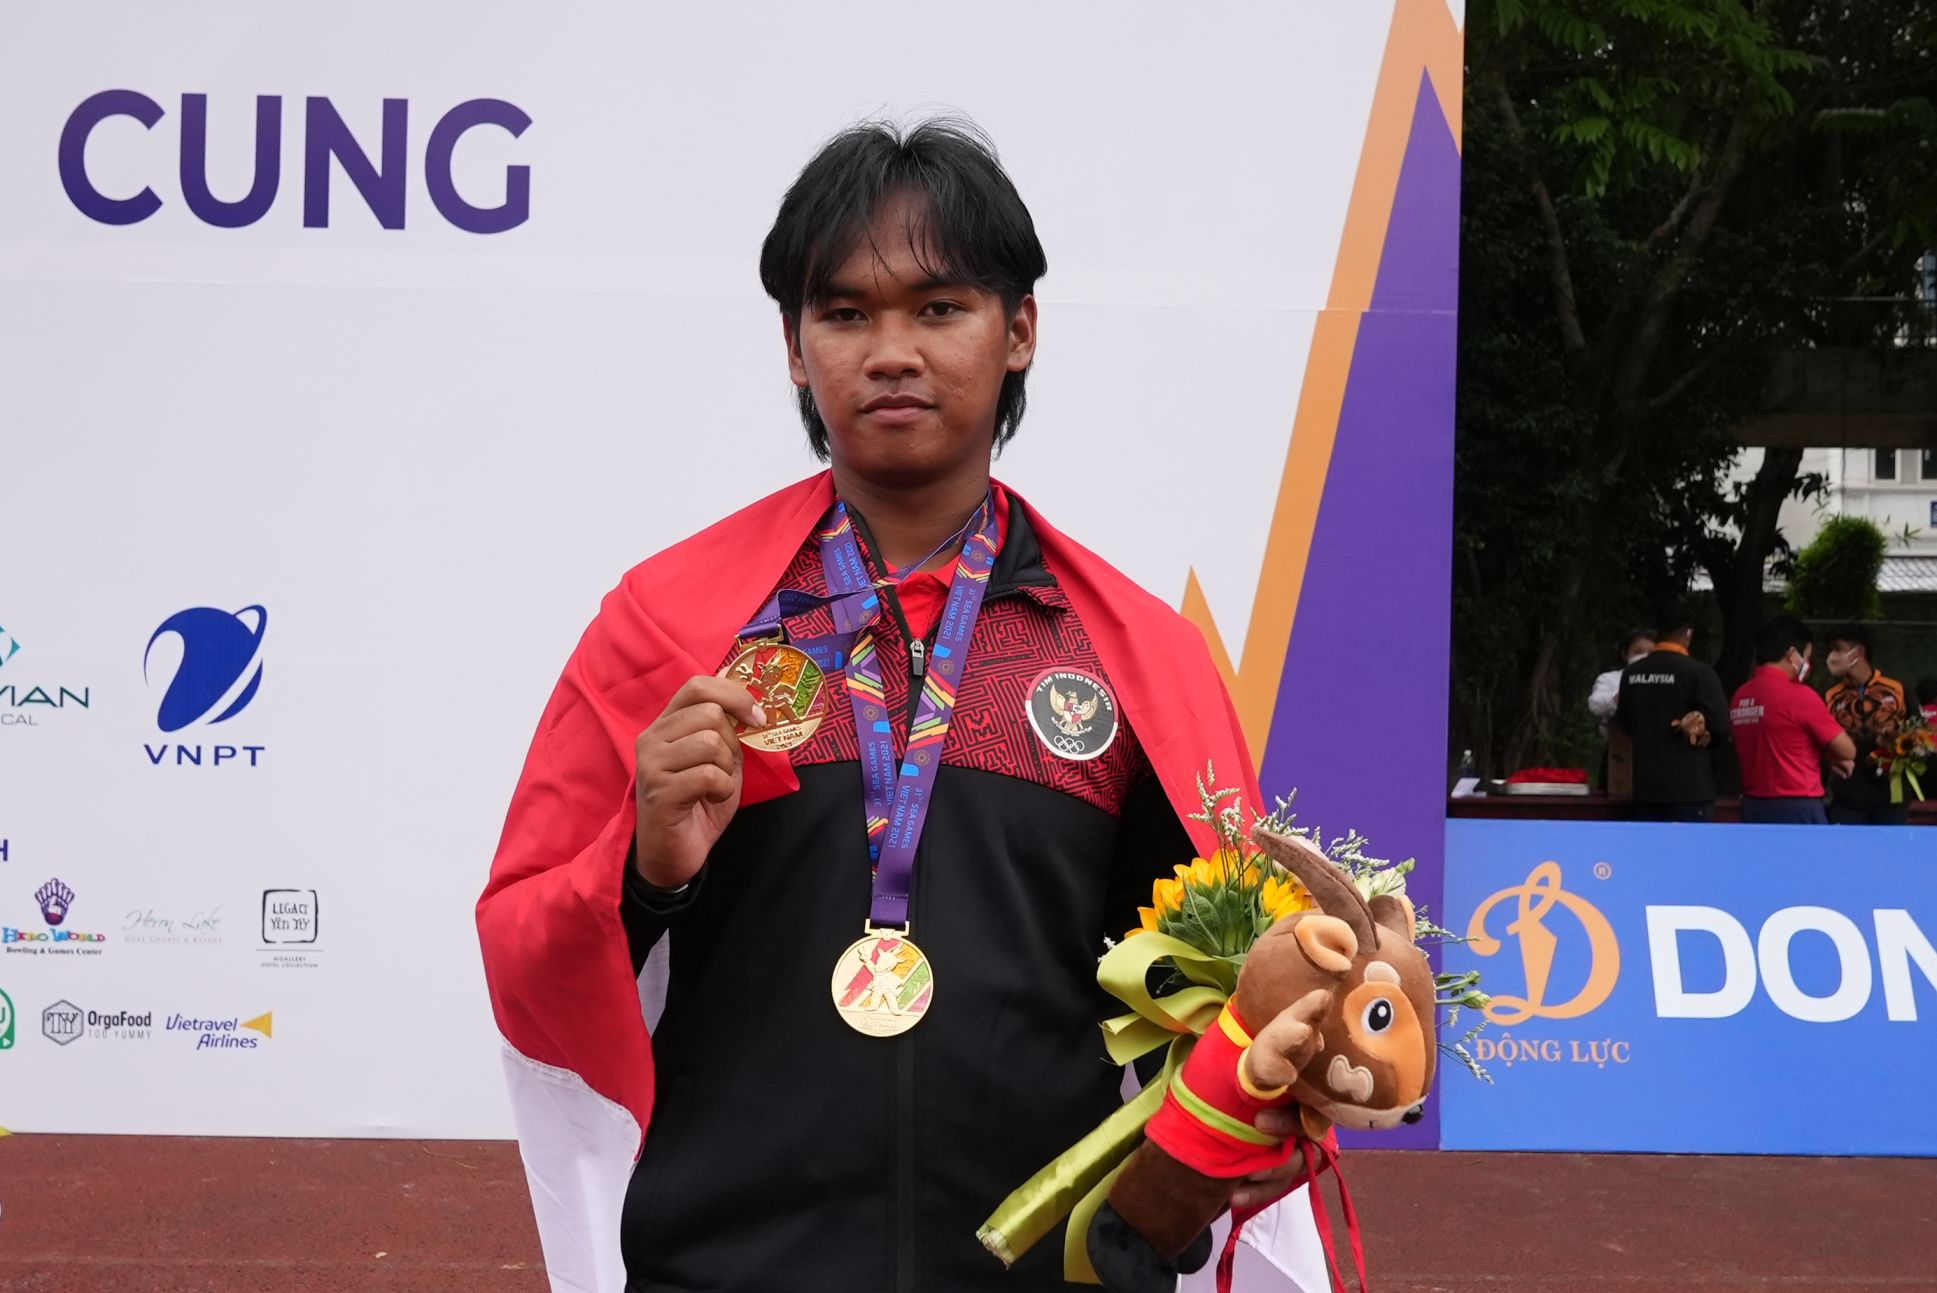 Indonesia Olympic Commitee - "I wanted to make her proud, no matter what"